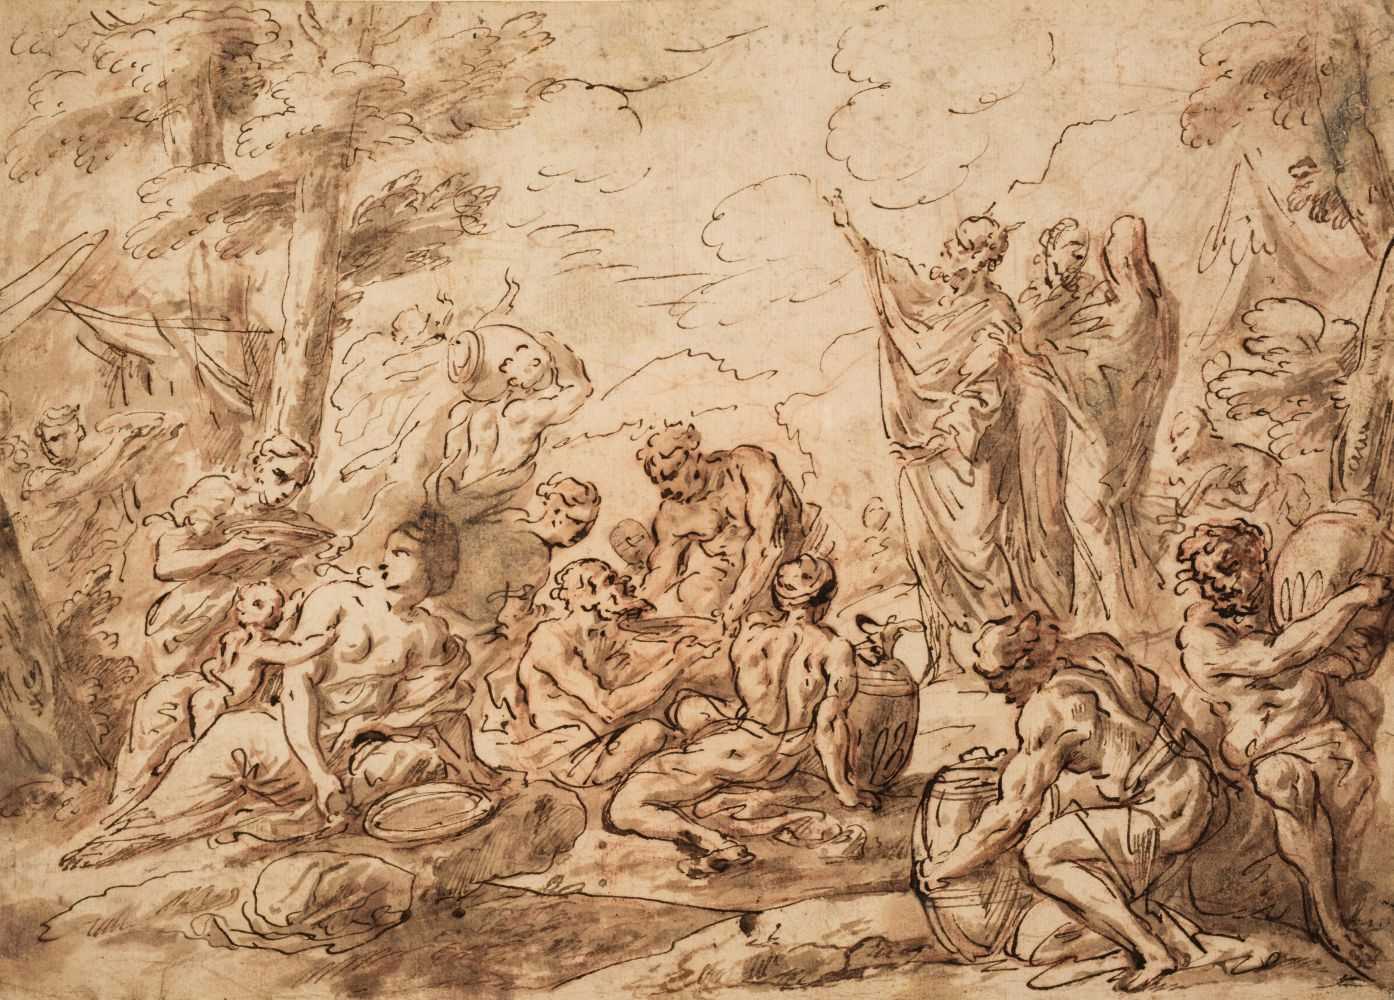 Lot 3 - Carlone (Giovanni Andrea, 1639-1697, attributed to). Gathering of Manna, pen and brown ink